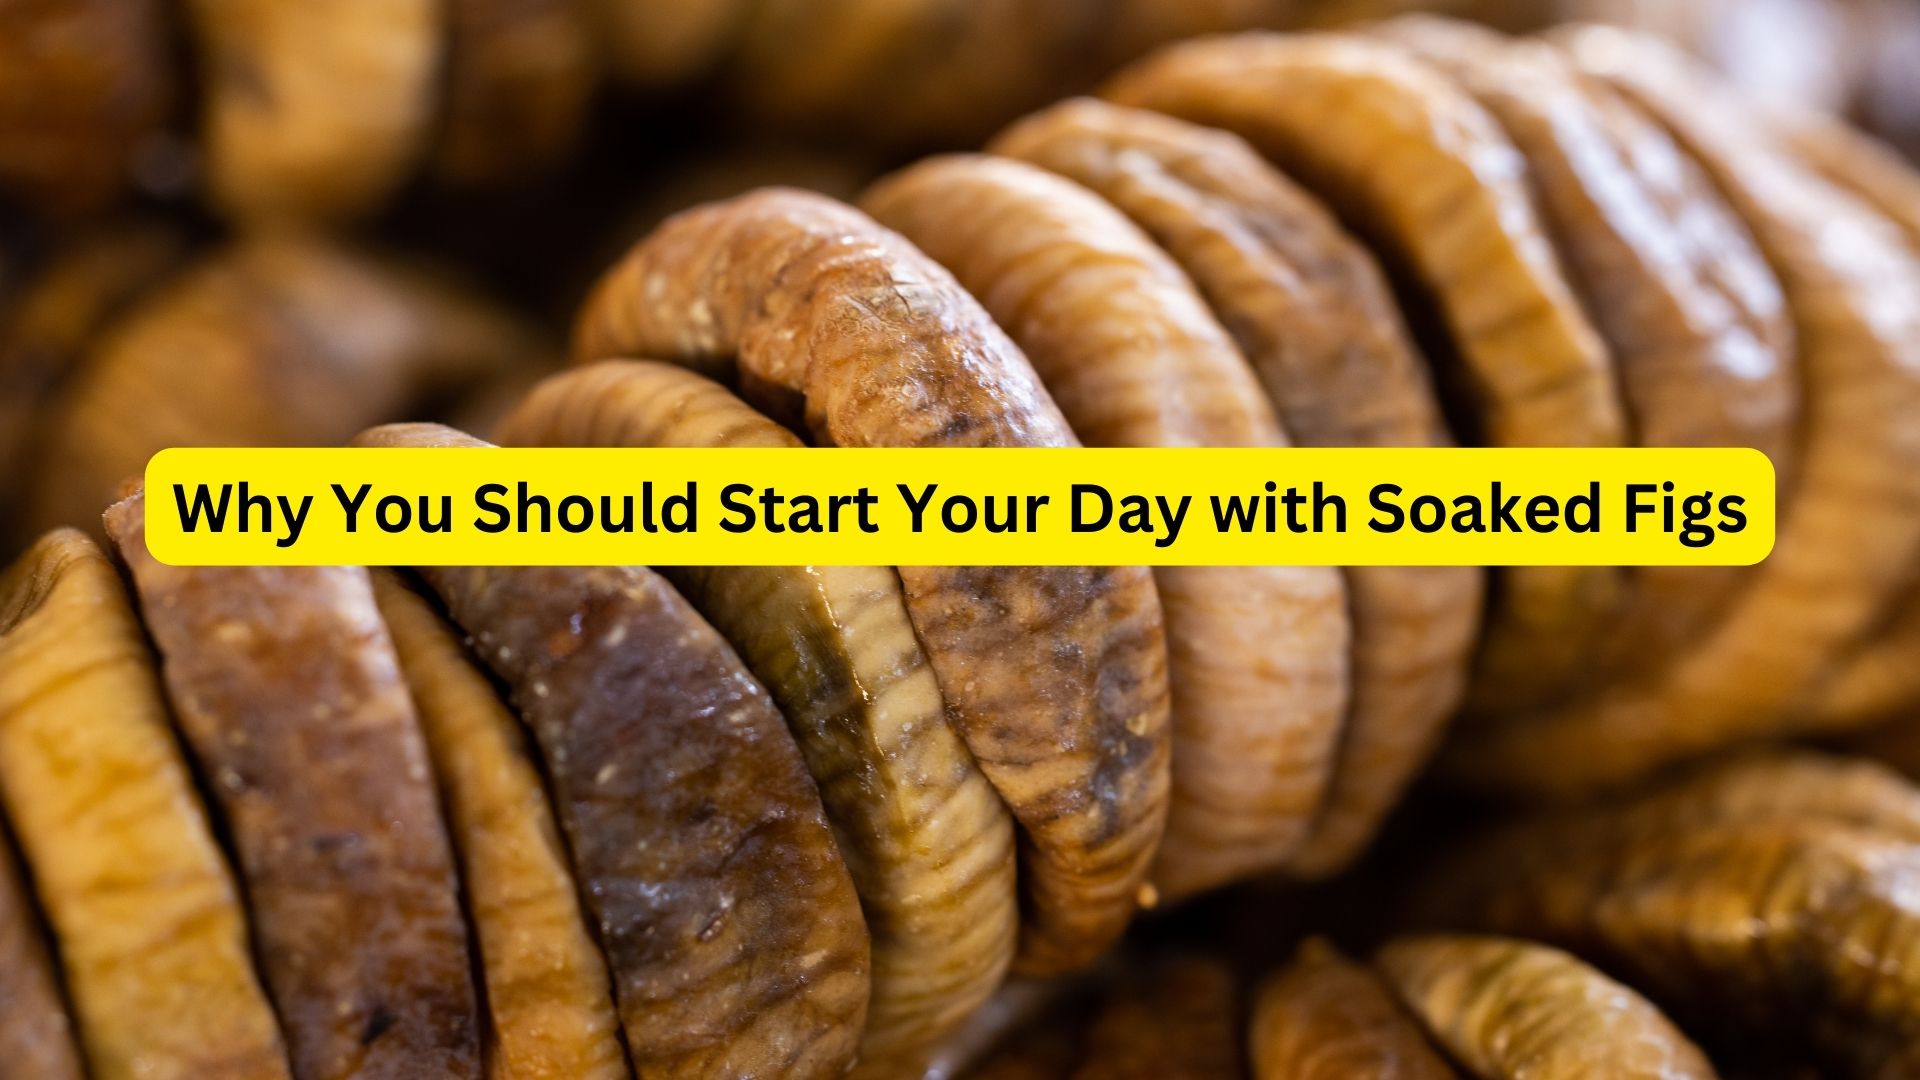 Why You Should Start Your Day with Soaked Figs